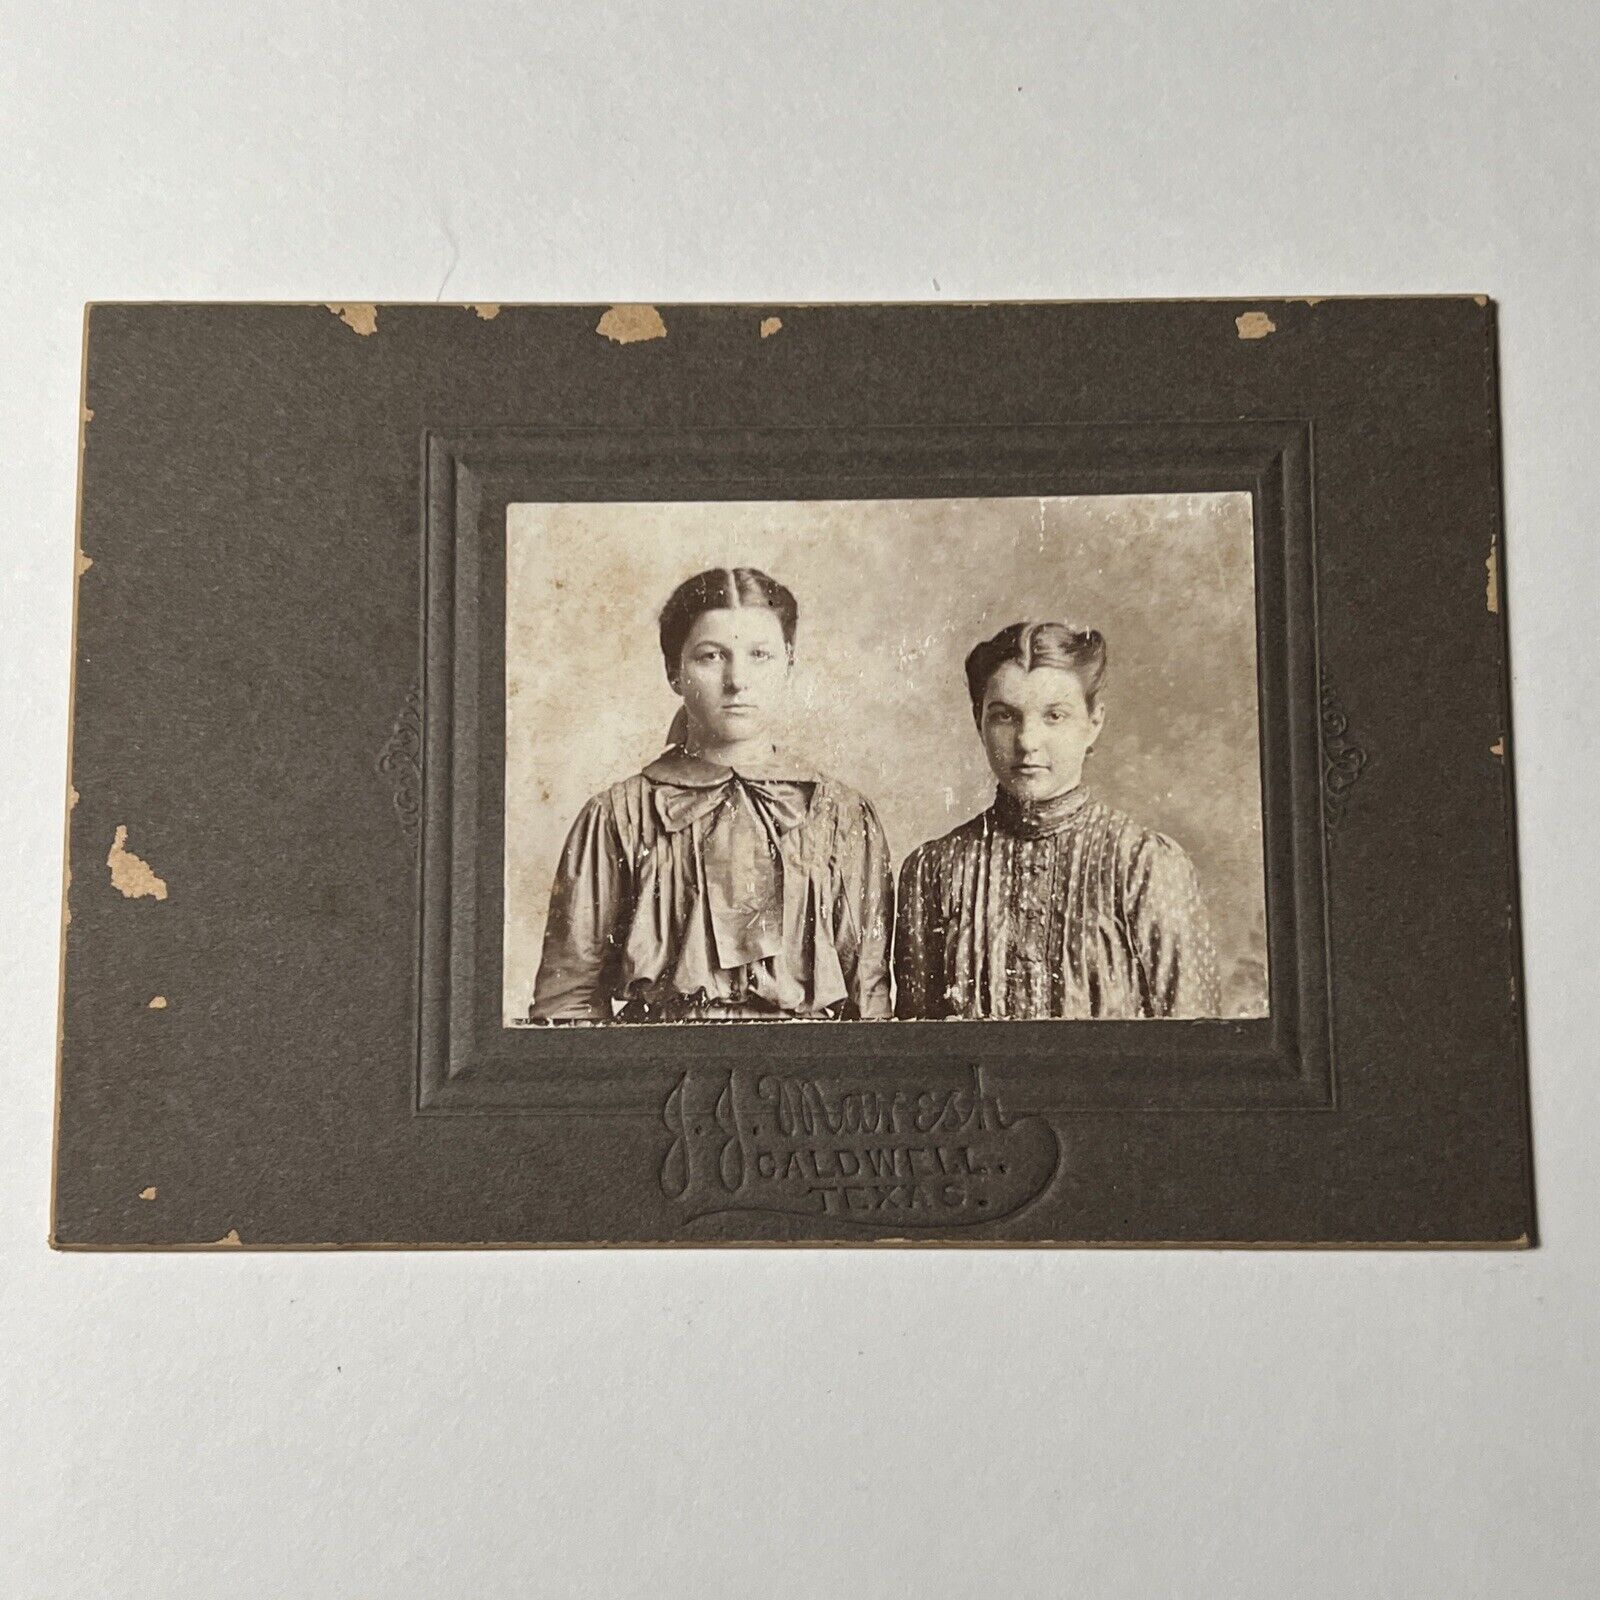 2 Young Sisters of CALDWELL TEXAS Antique Cabinet Card Photo